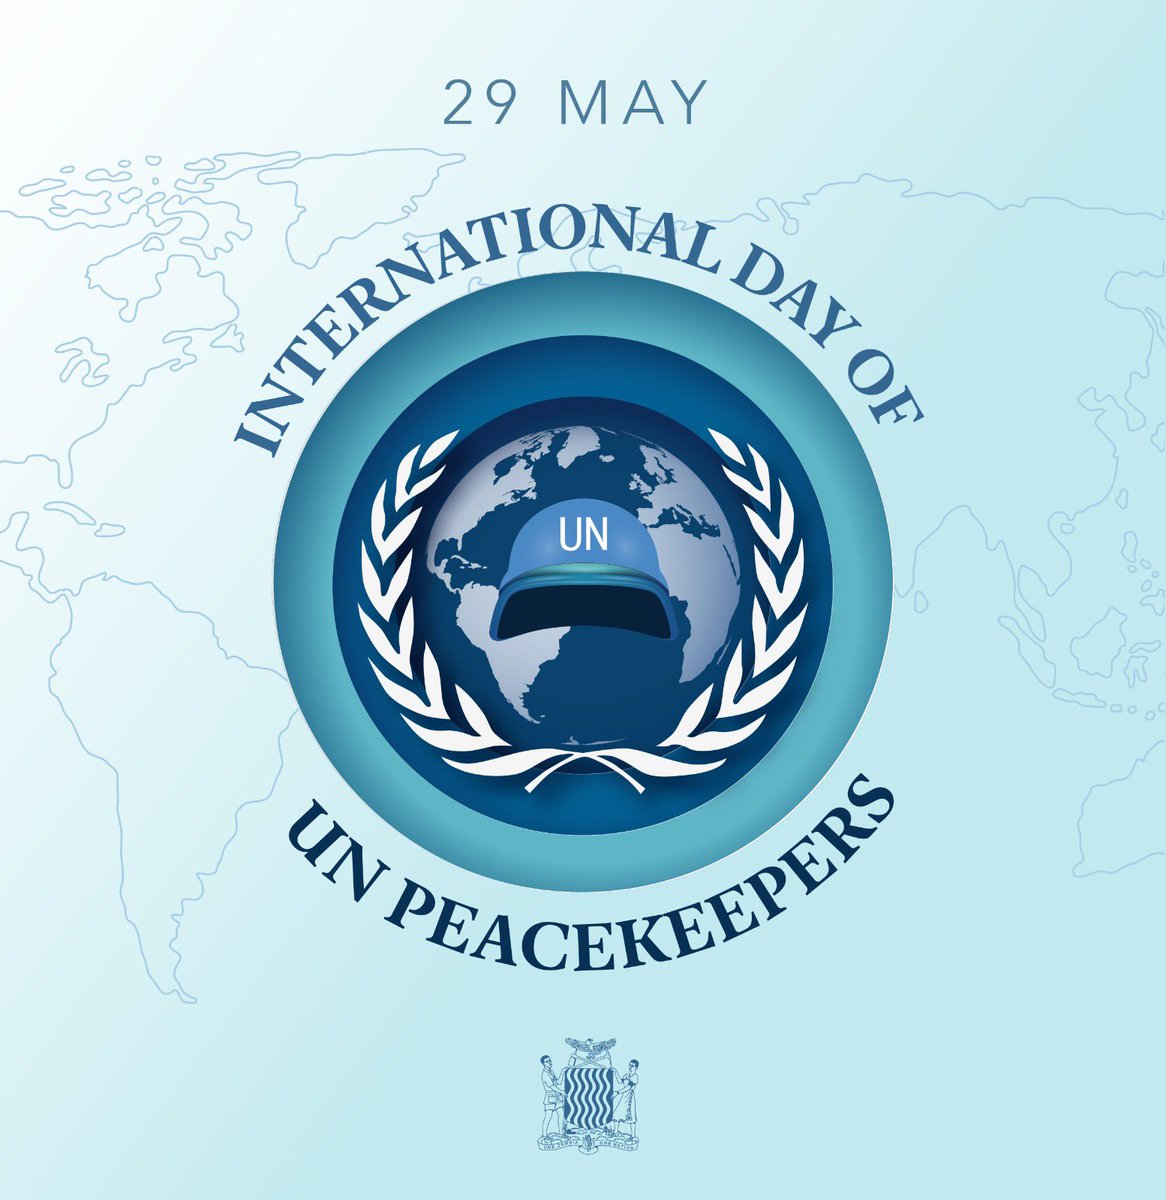 On this @UNPeacekeeping Day, we acknowledge the role they play in maintaining #WorldPeace via the multilateral system. We specifically recognise the Zambian men & women currently deployed in various peace operations around the world. #PK75 #ServingForPeace